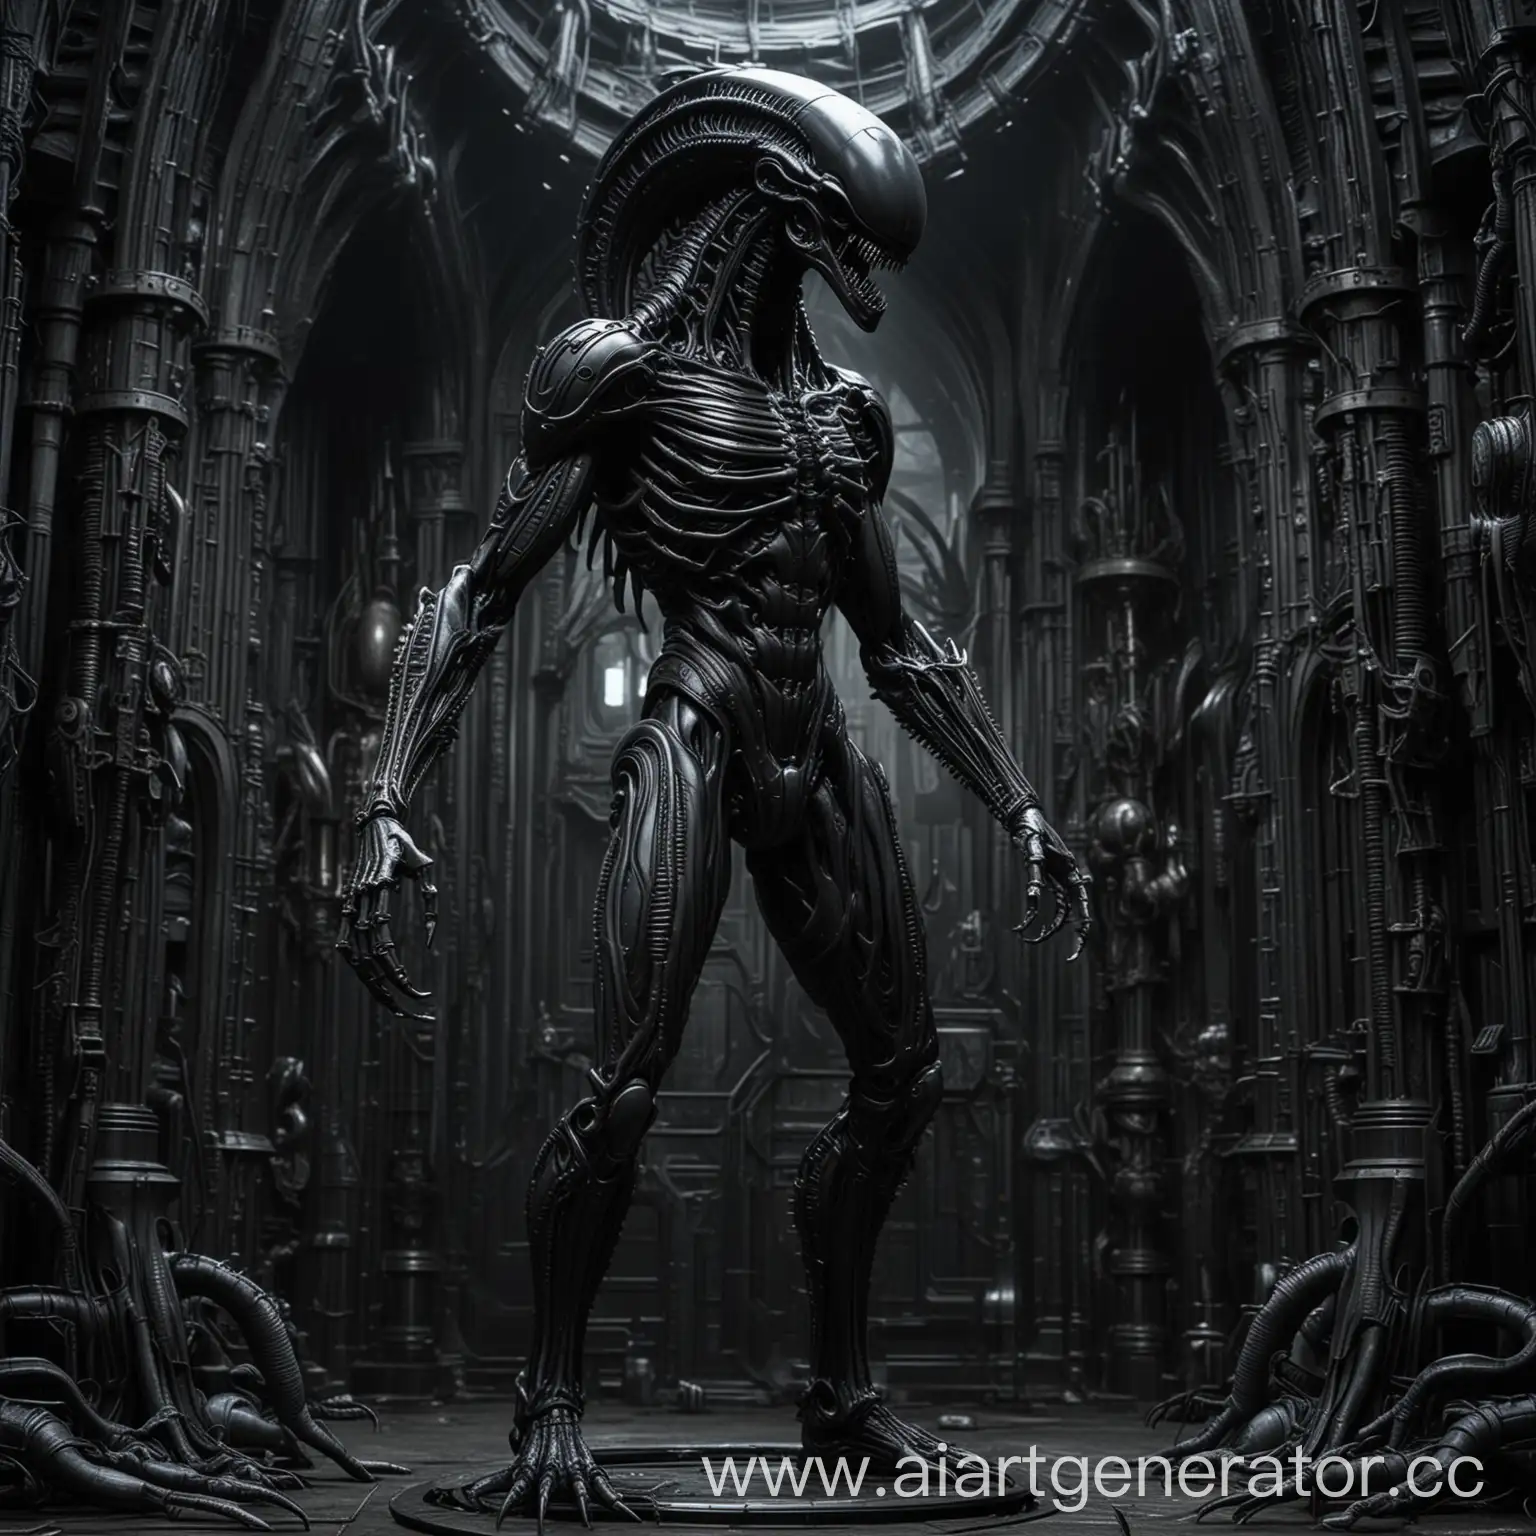 HR-Giger-Style-Black-Metal-Xenomorph-in-Infernal-Gothic-Cathedral